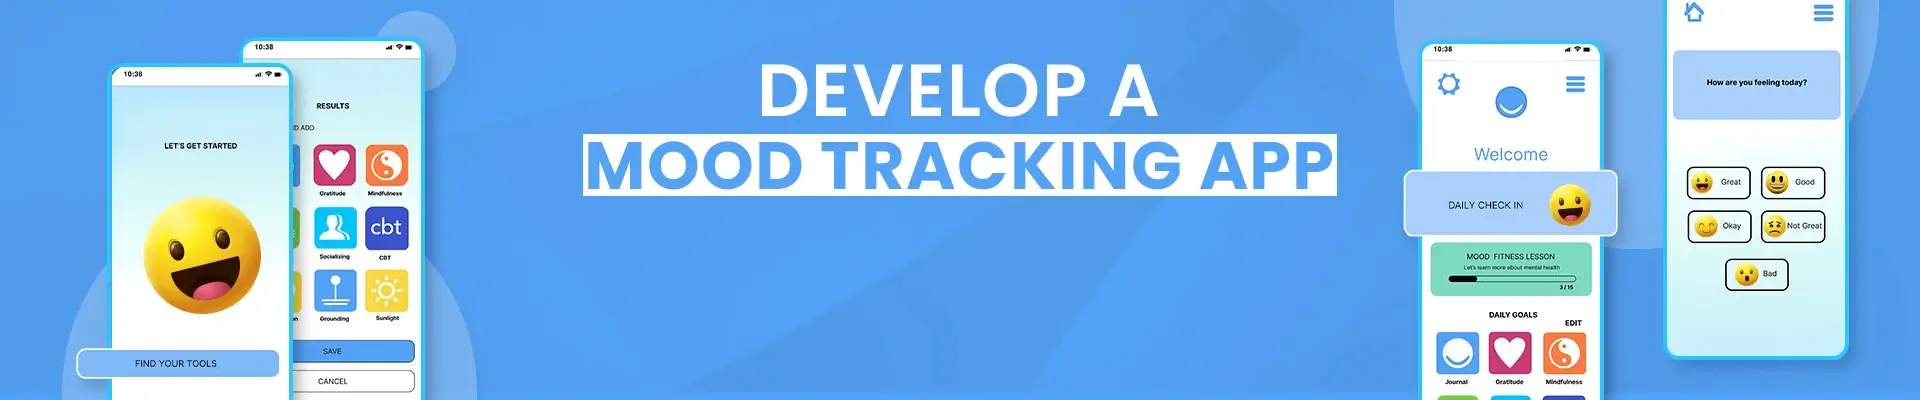 Complete Guide to Develop a Mood Tracking App